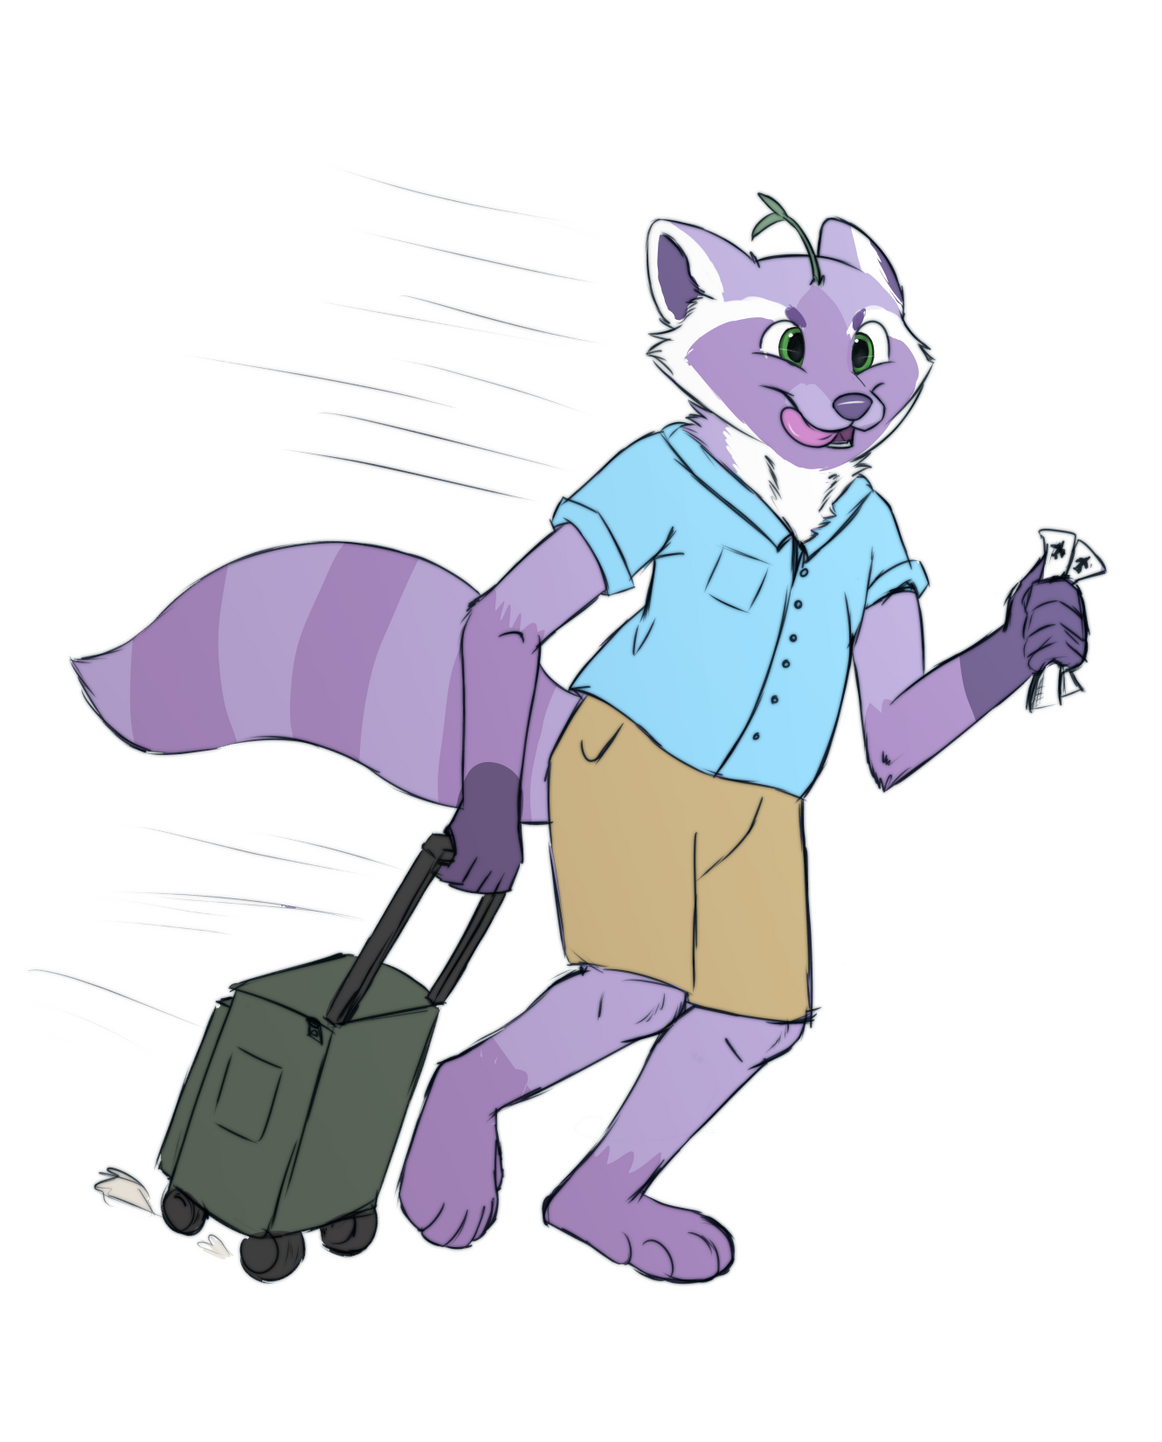 Eufuria's raccoon mascot running while holding plane tickets and pulling a suitcase